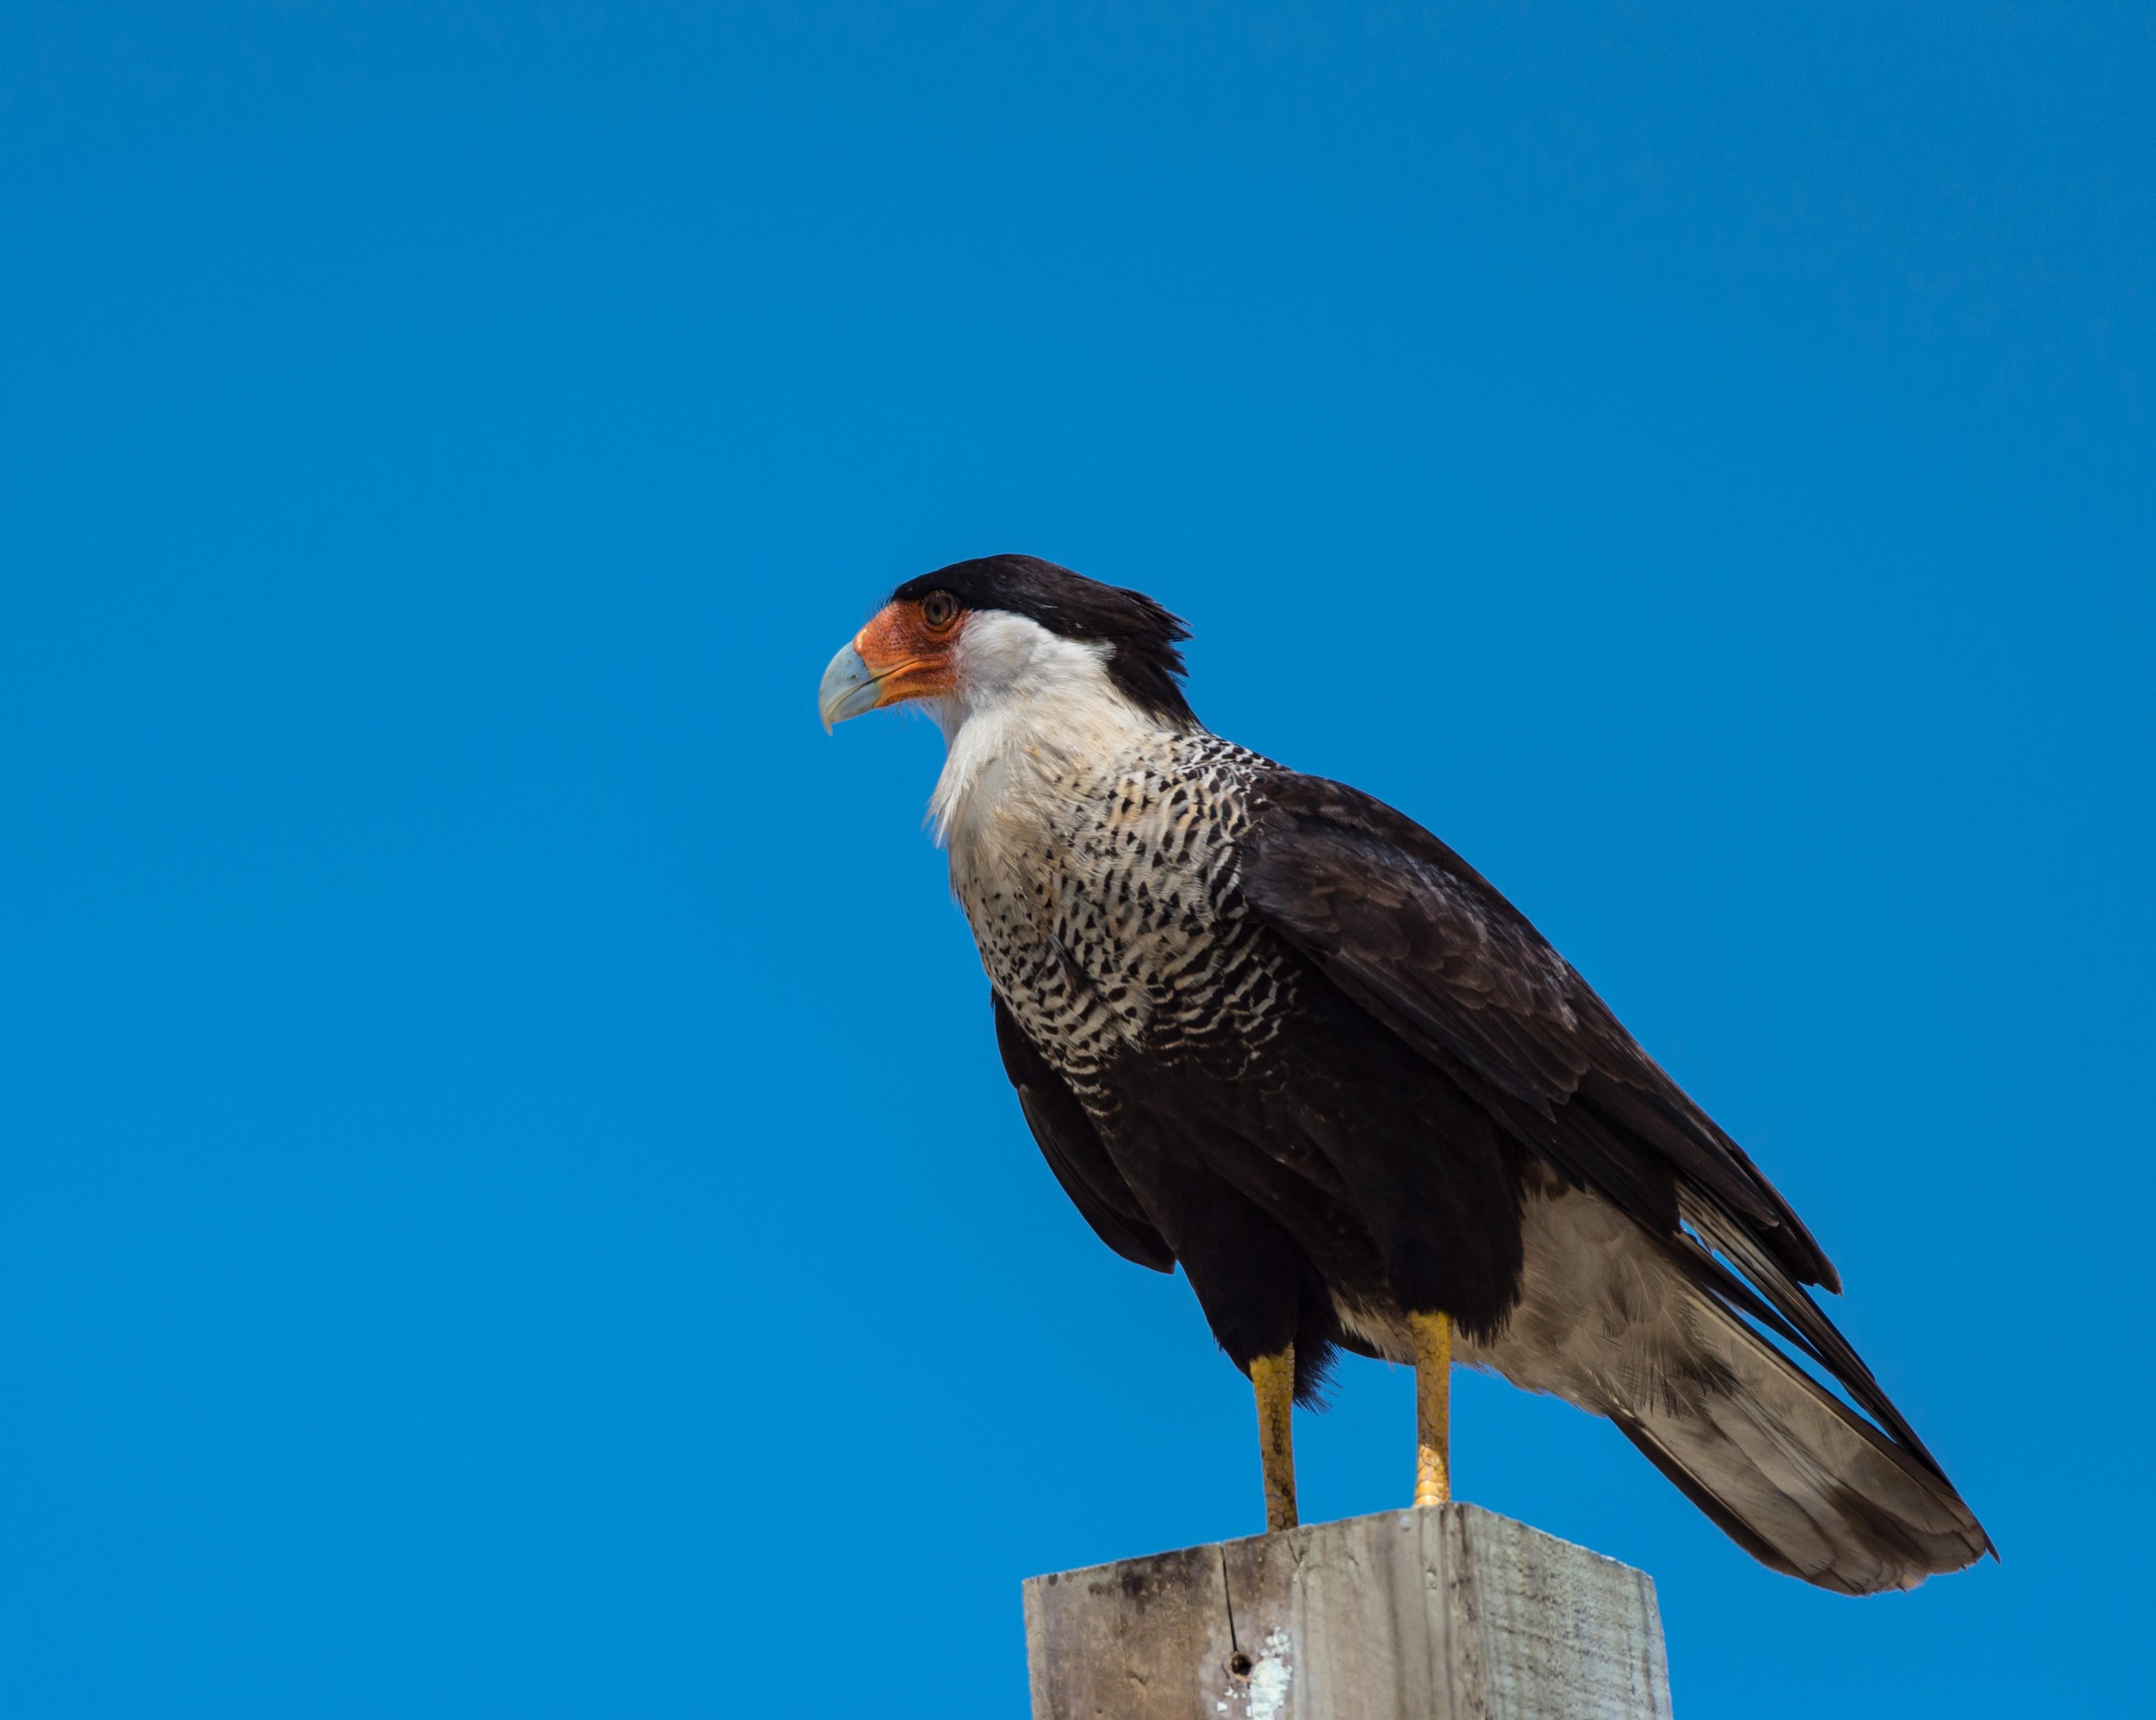 A hawk like bird with an orange beak stands on a fence post.